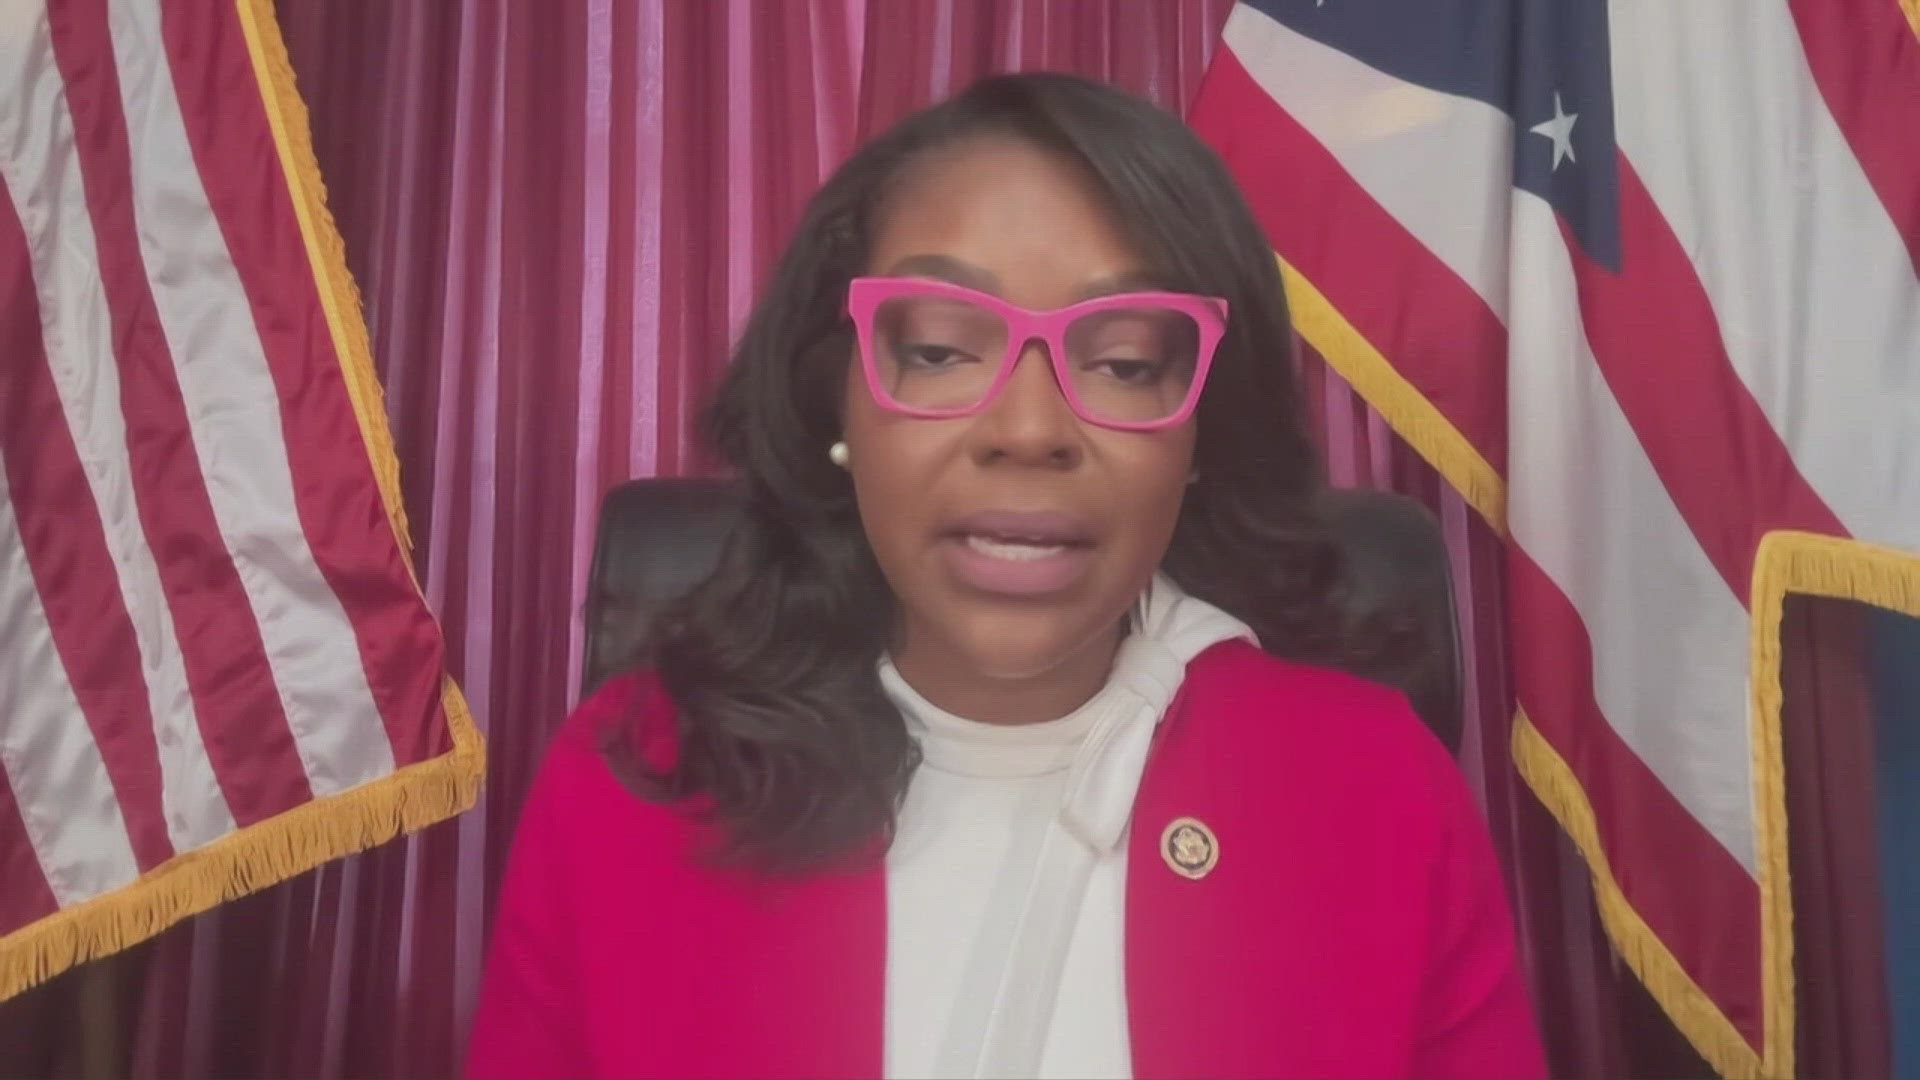 In an exclusive interview with 3News' Danielle Wiggins, Sykes says the bill will look to rebuild trust between law enforcement and the communities they serve.